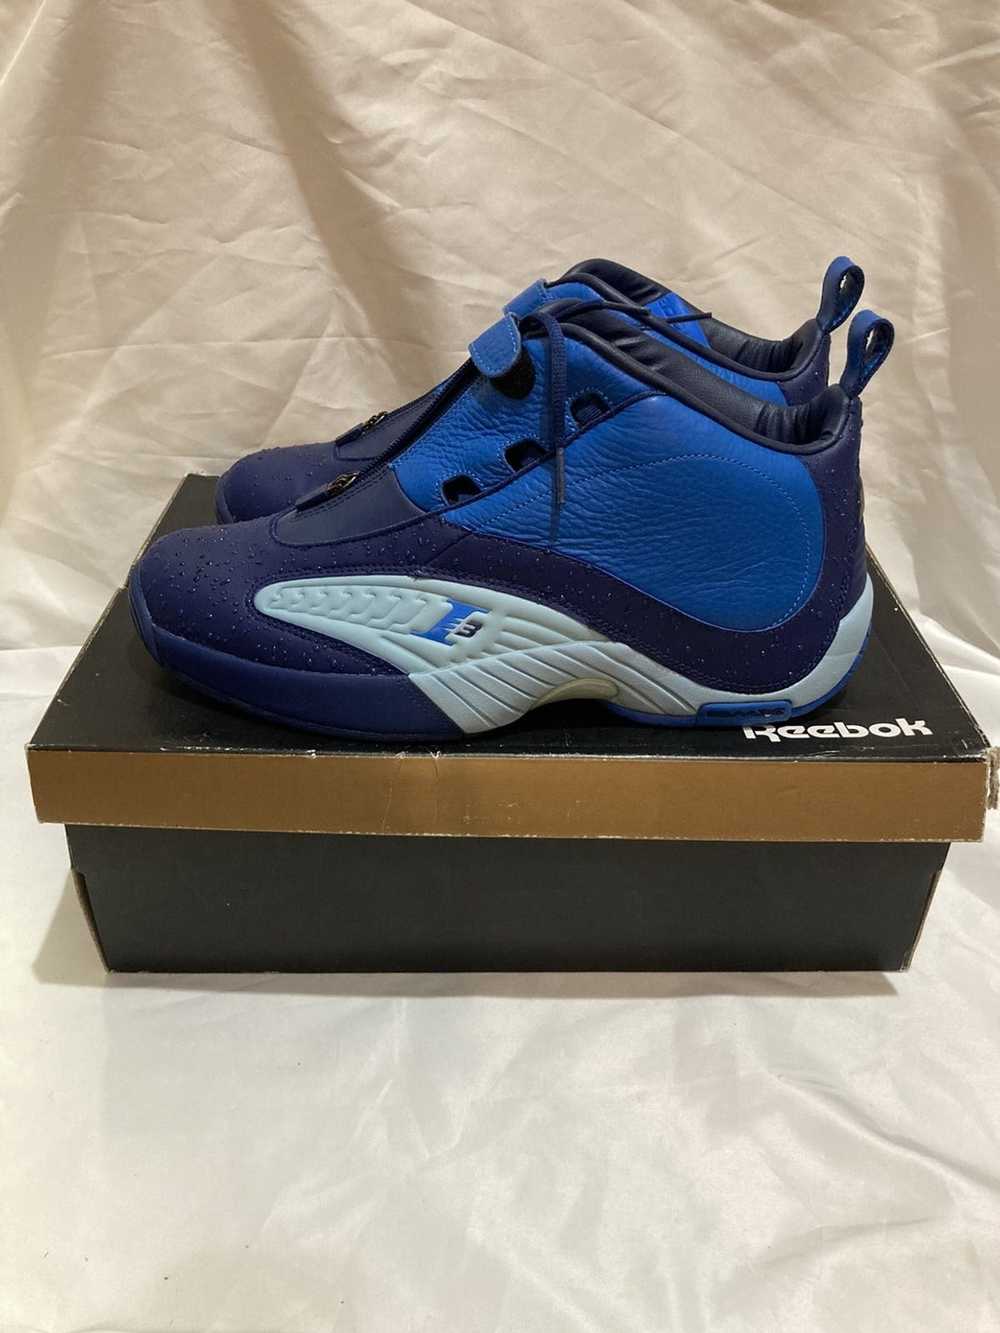 Exclusive Drop at Packer Shoes - the Packer x Reebok Answer 4